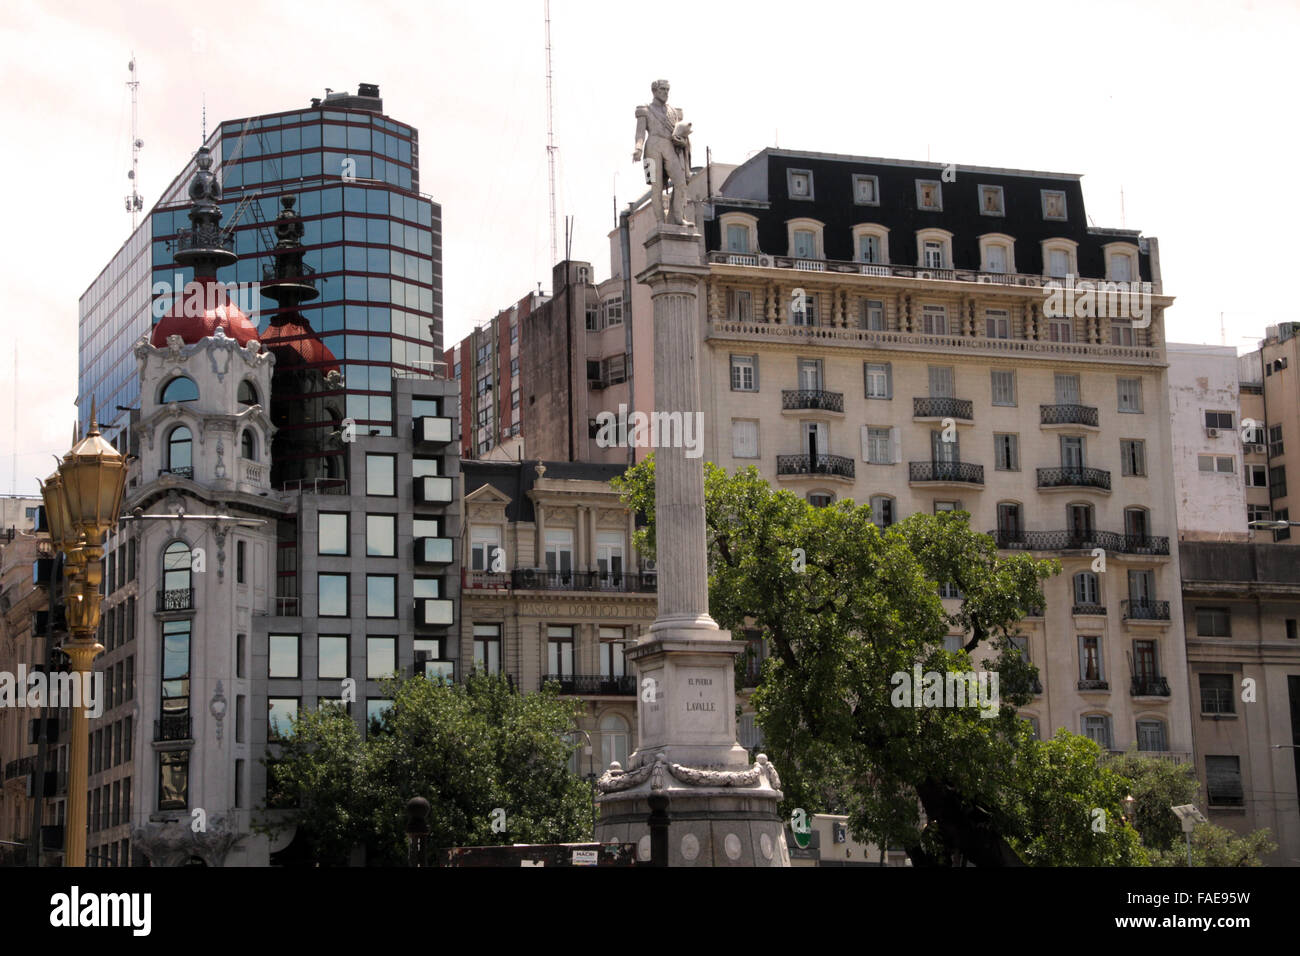 BUENOS AIRES, 28.12.2015 - Ansicht der Plaza Lavalle (Lavalle Quadrat) vor Colon Theater und Palace of Justice in Buenos Aire Stockfoto